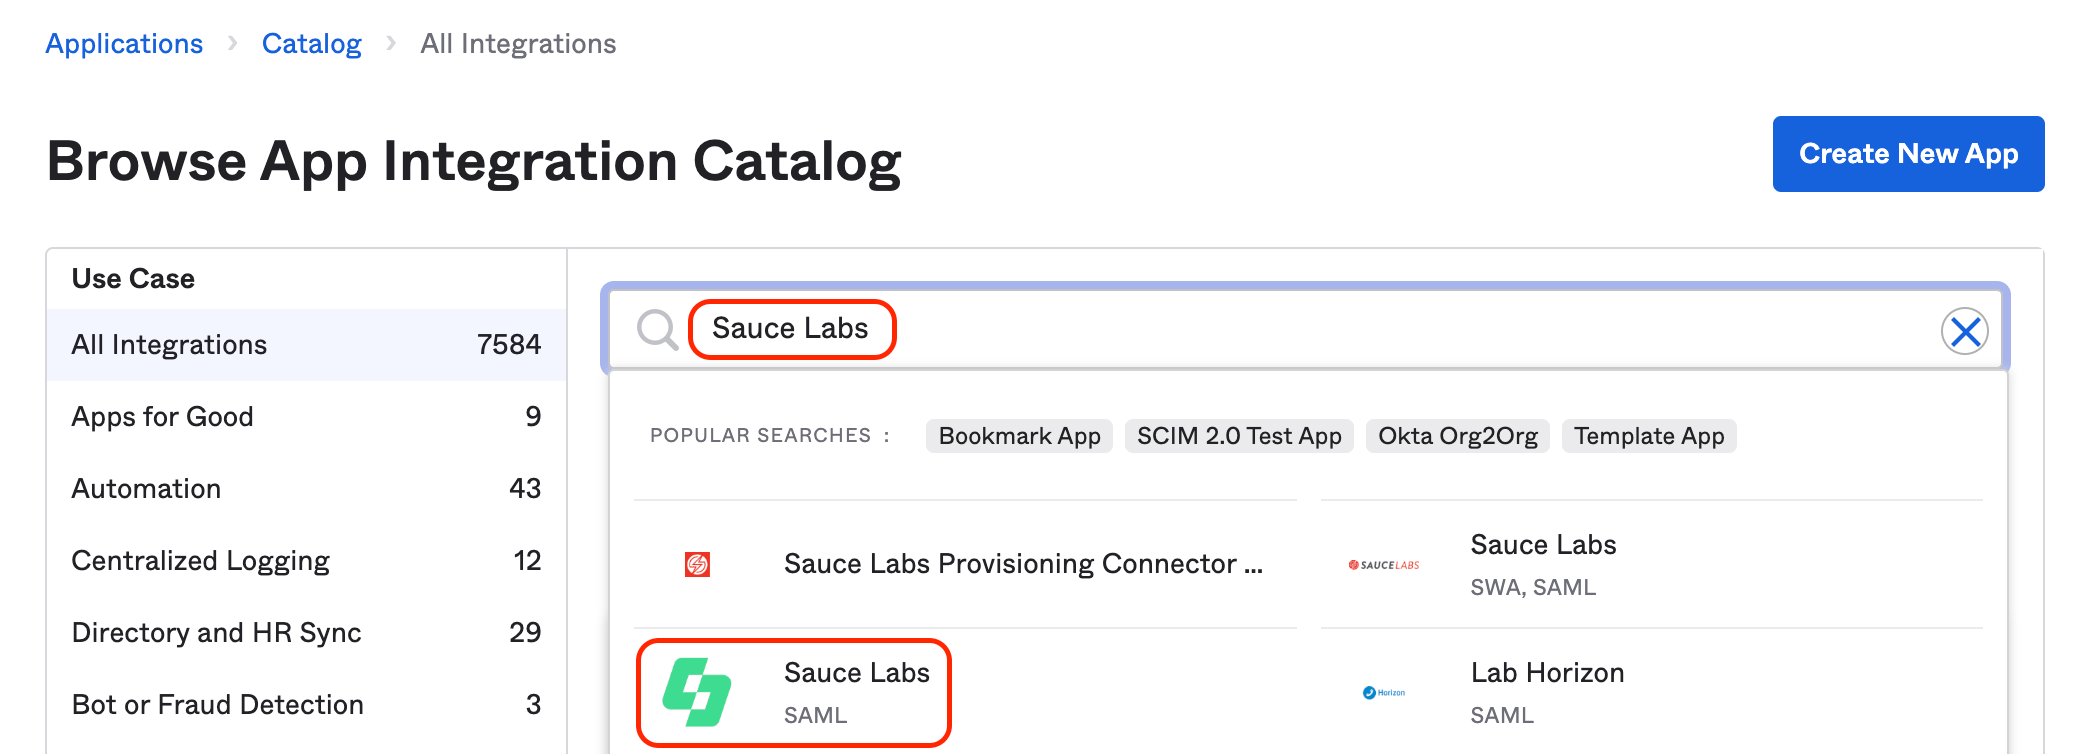 Search For Sauce Labs